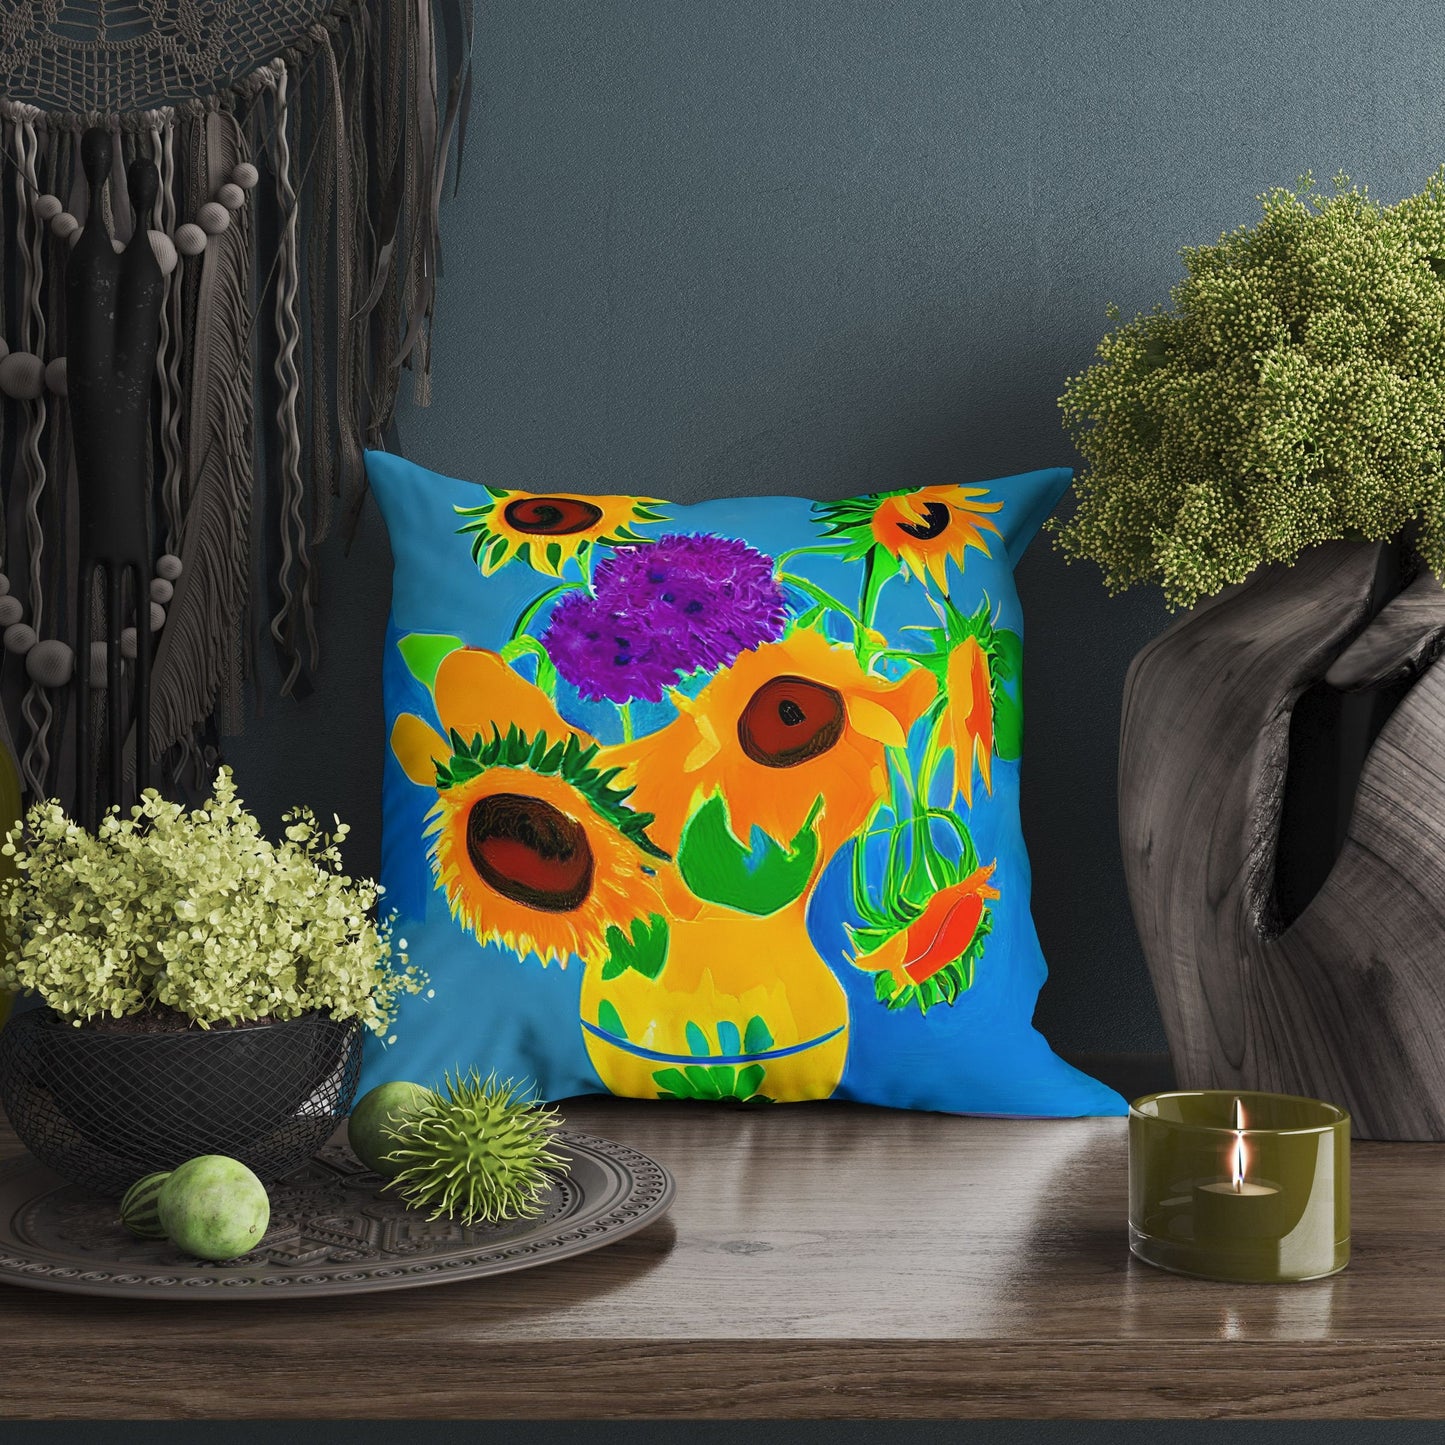 Sunflowers Decorative Pillow, Abstract Floral Pillow Covers, Artist Pillow, Colorful Pillow Case, Contemporary Pillow, 20X20 Pillow Cover